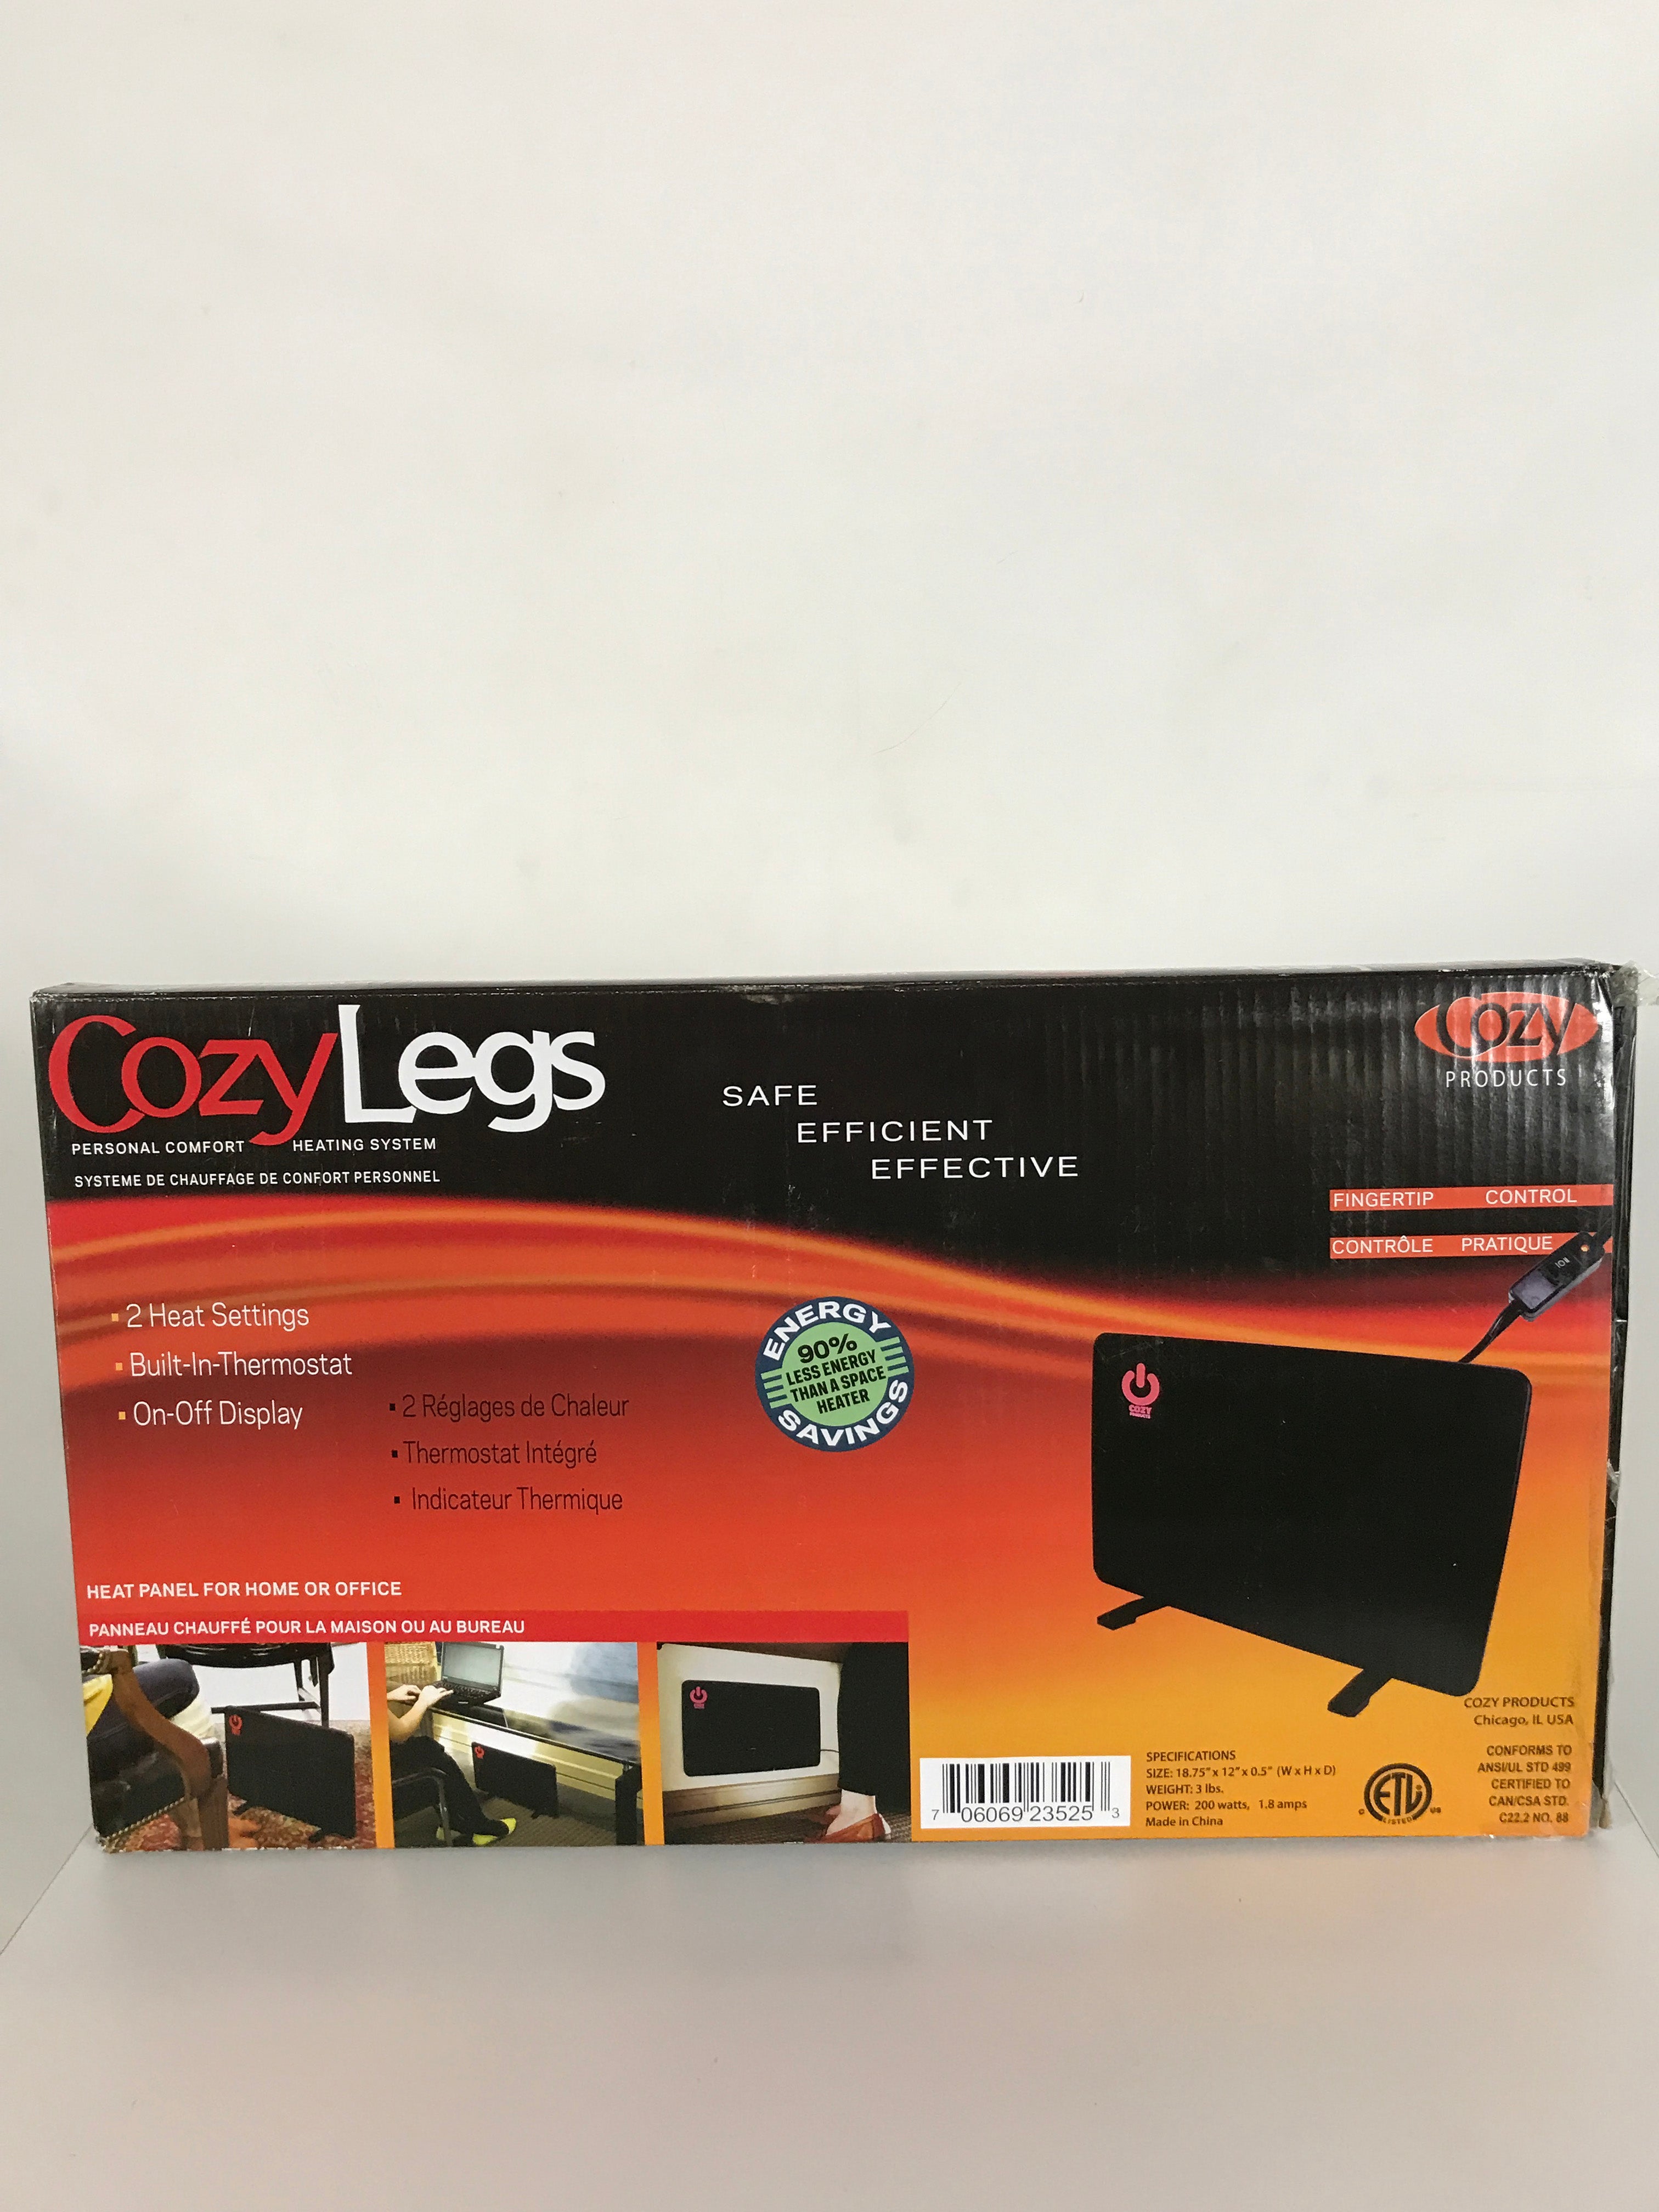 Cozy Legs Personal Comfort Heating System